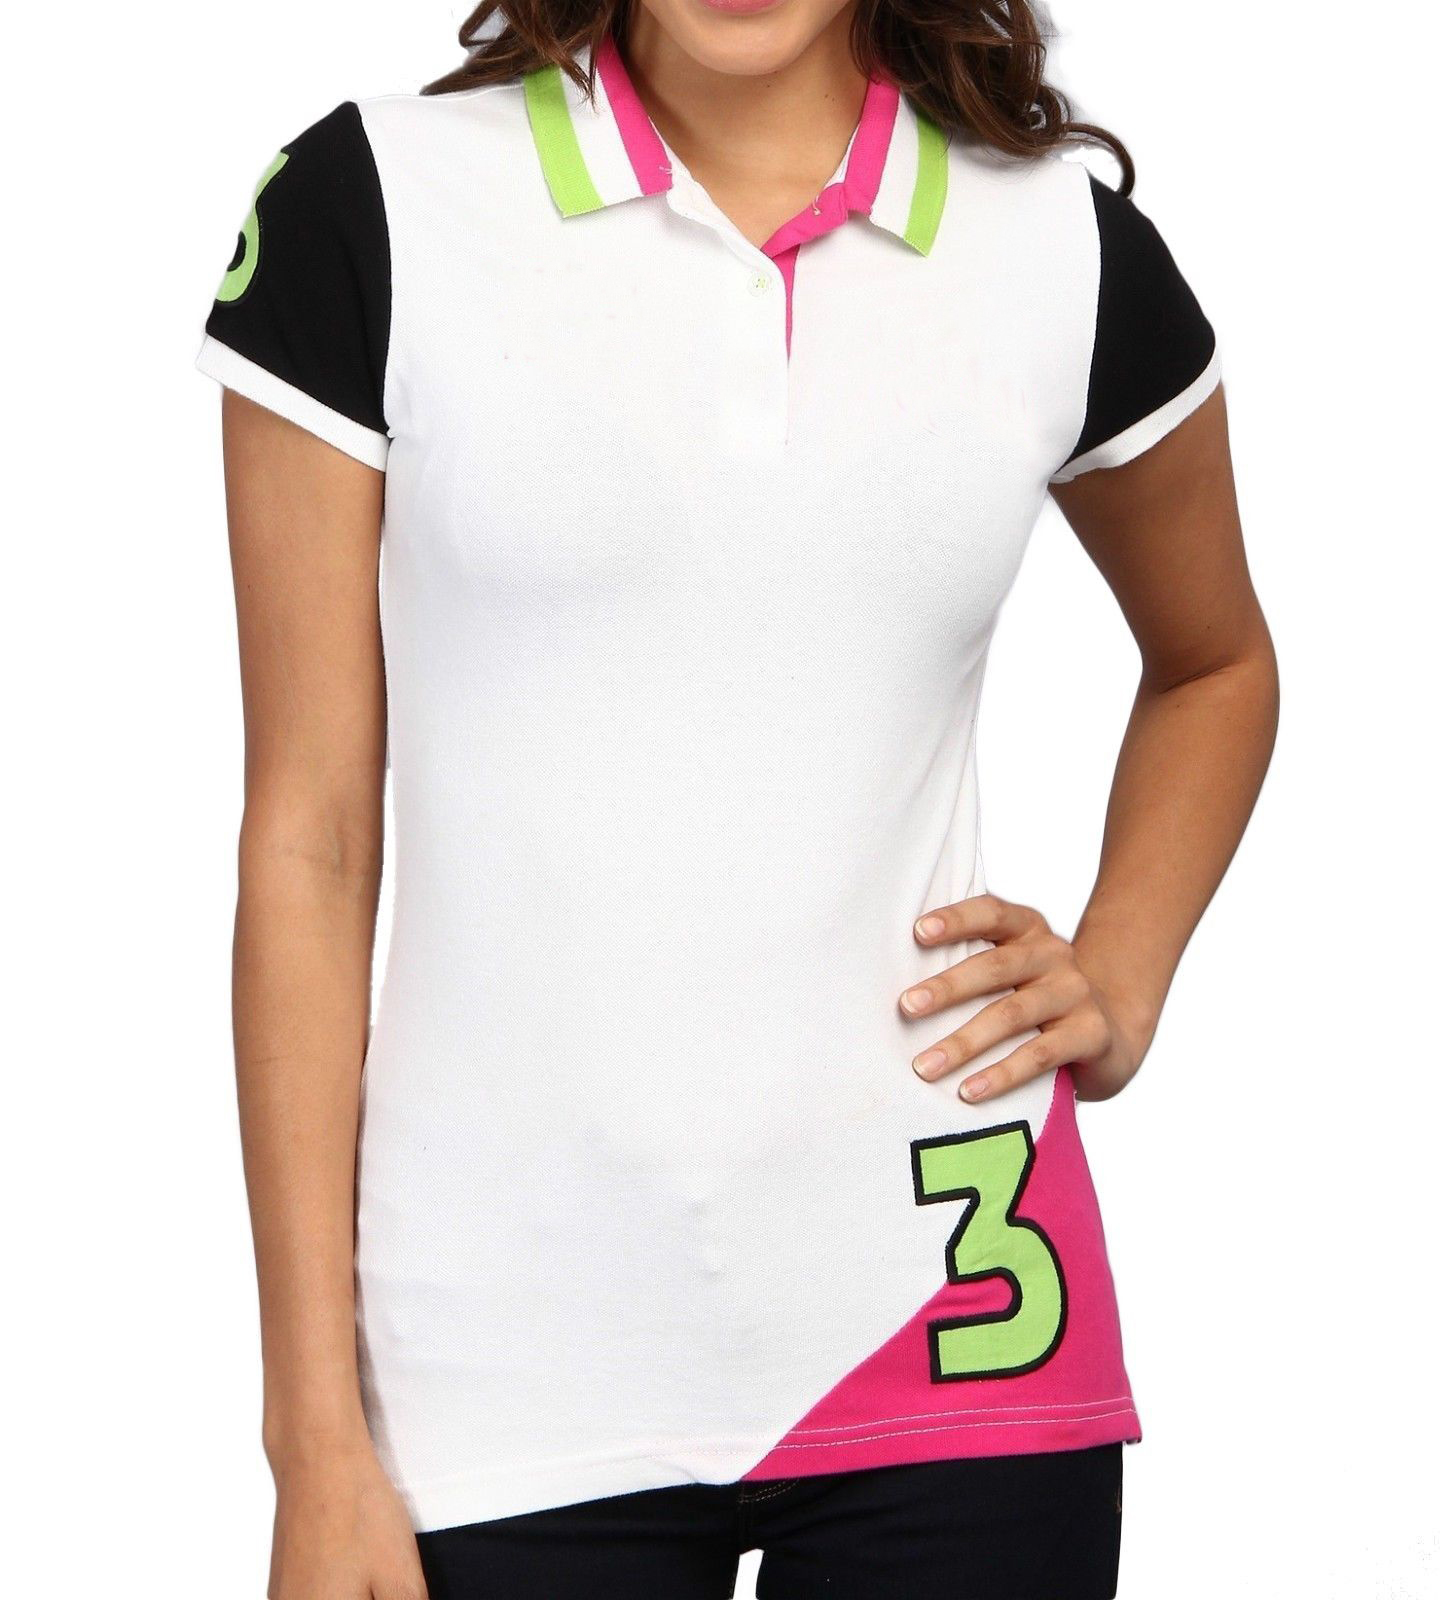 sports T-Shirt Manufacturers and Exporters in India